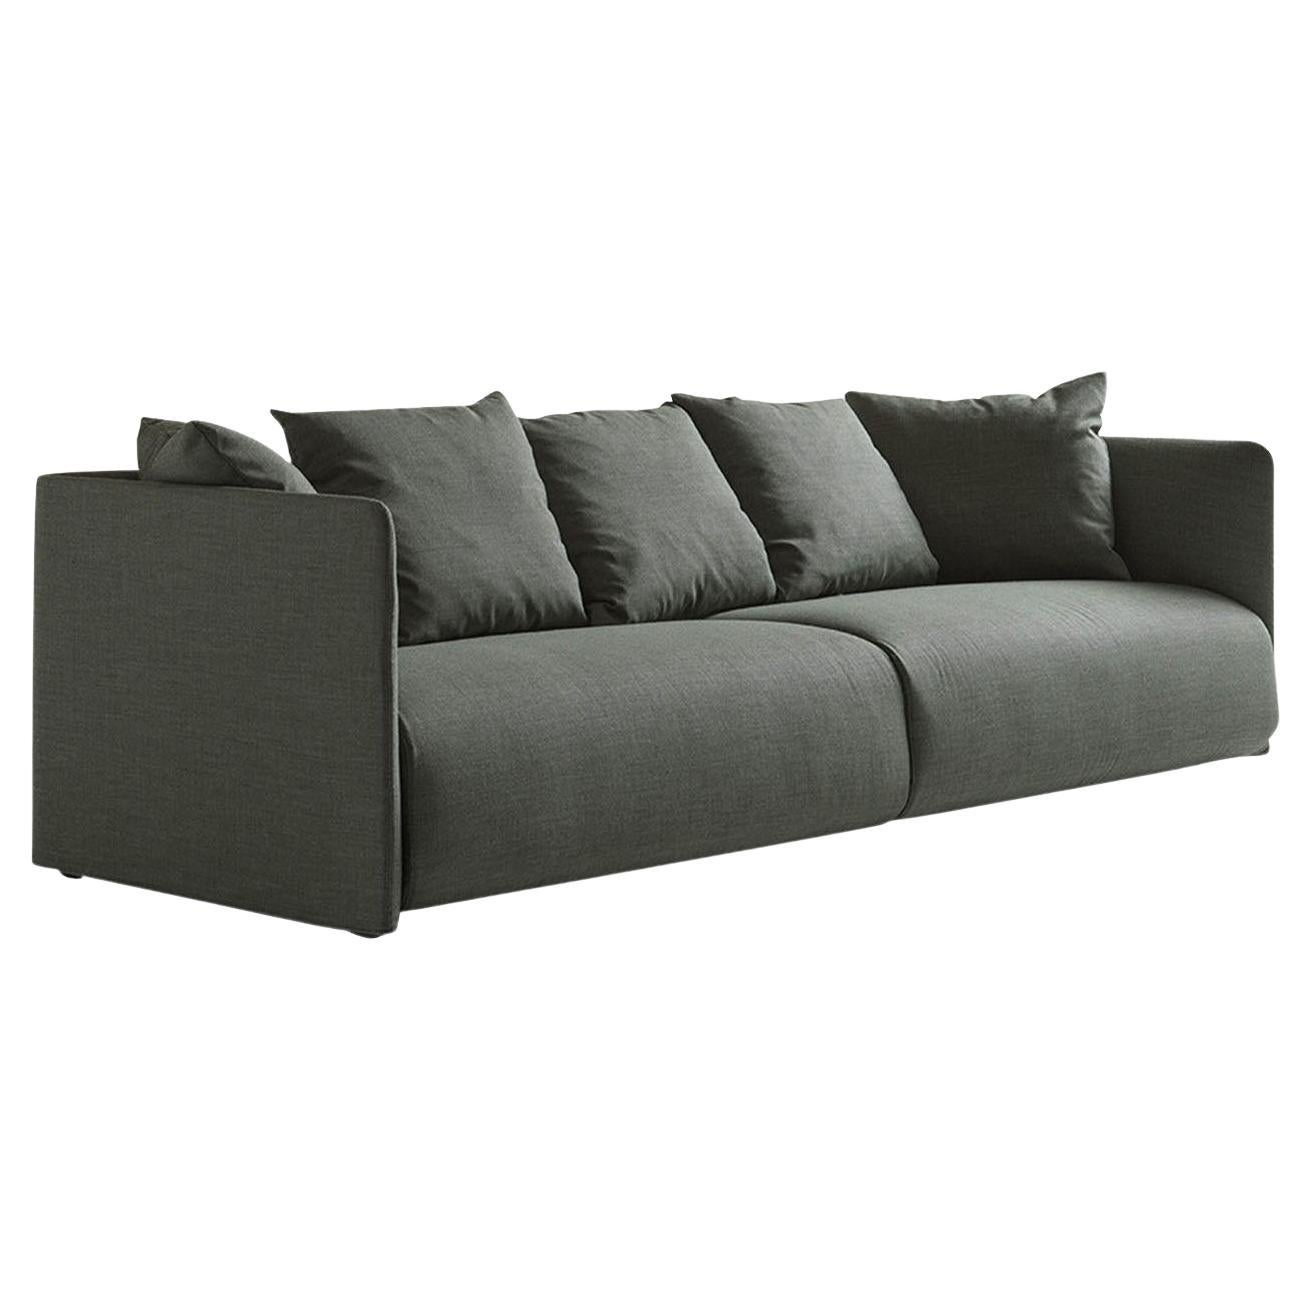 Lullaby Green Sofa For Sale